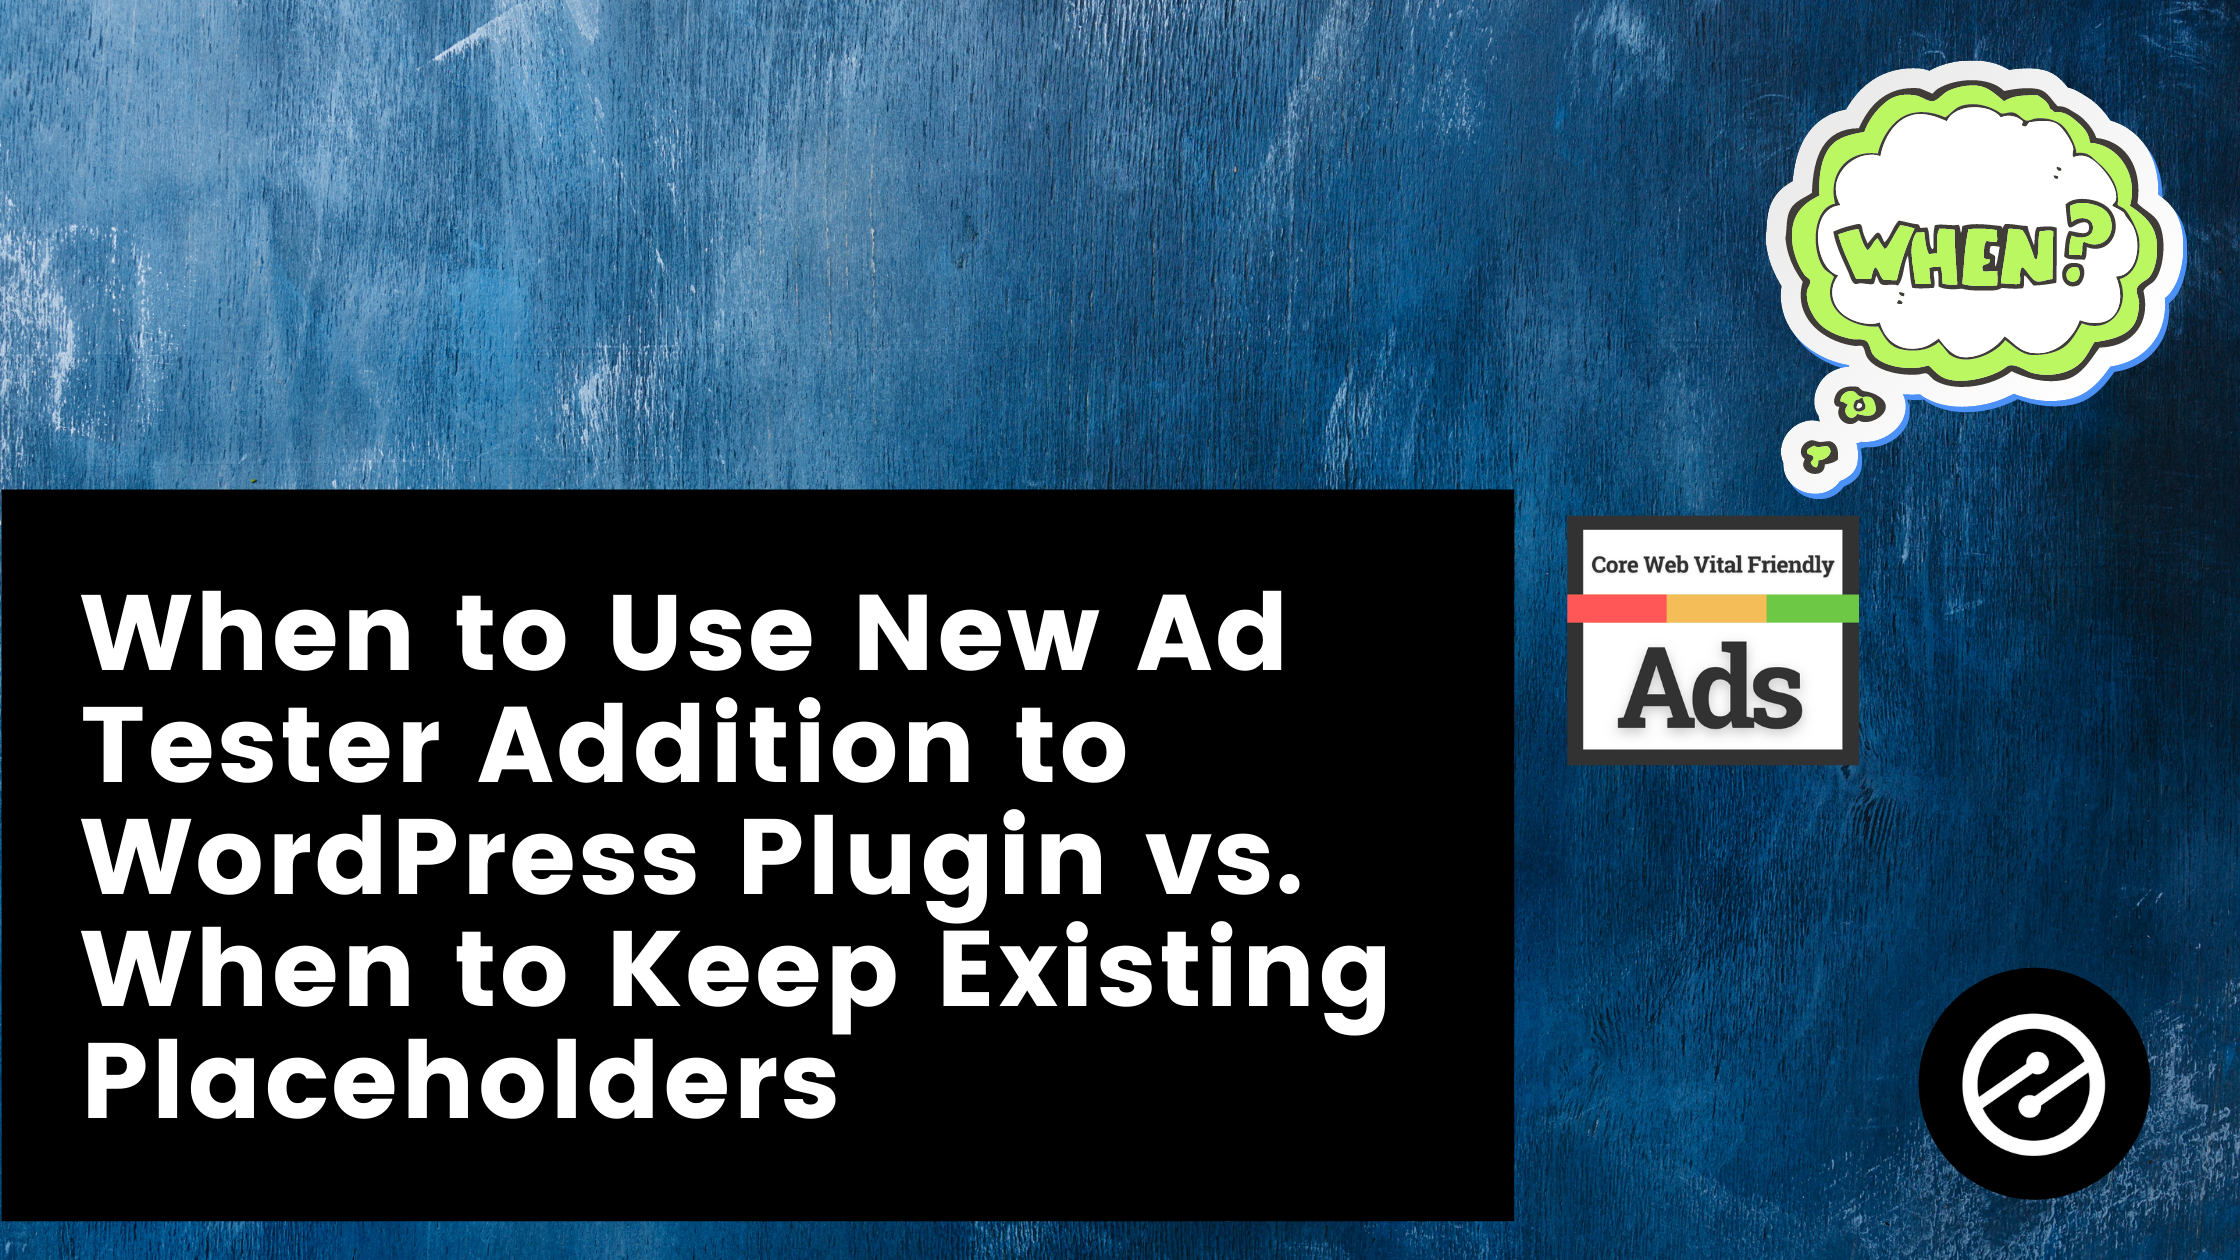 When to Use New Ad Tester Addition to WordPress Plugin vs. When to Keep Existing Placeholders